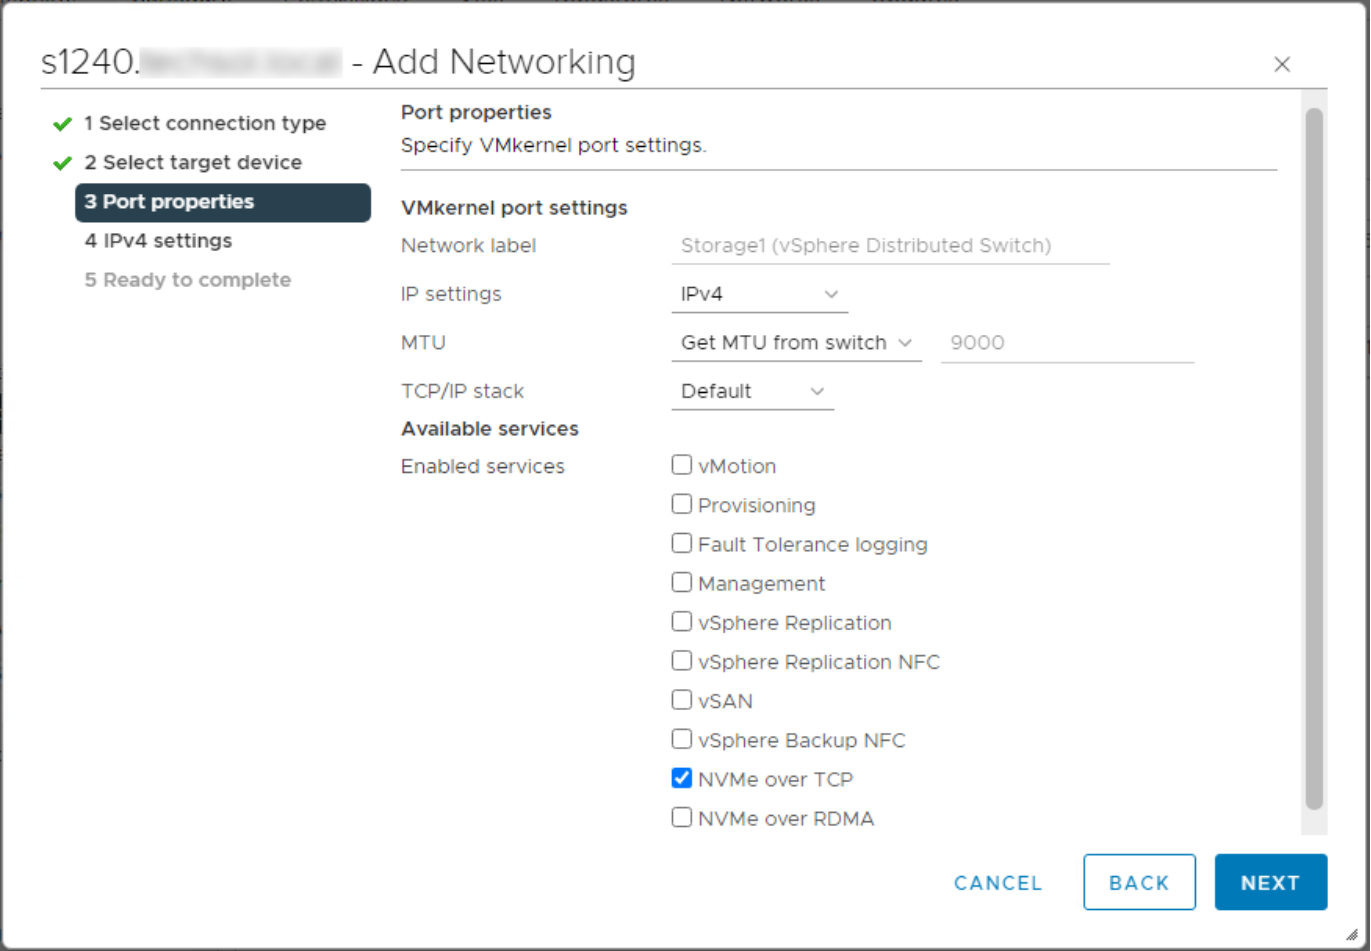 Workflow to add networking in the vSphere Client. Port properties are displayed and the NVMe over TCP box is checked.